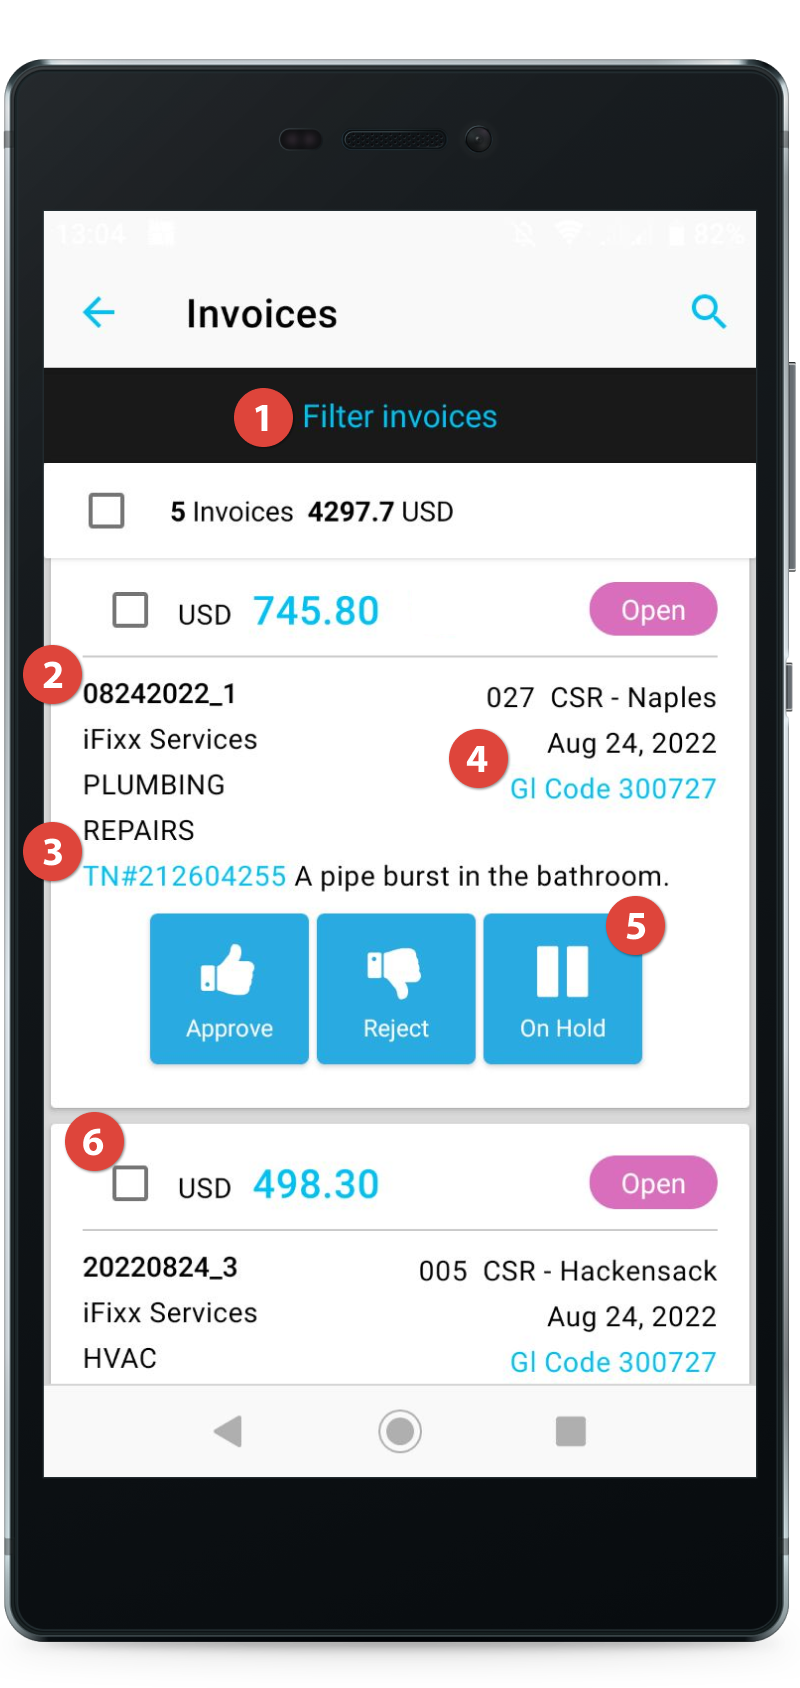 Actions you can take with invoices via Mobile